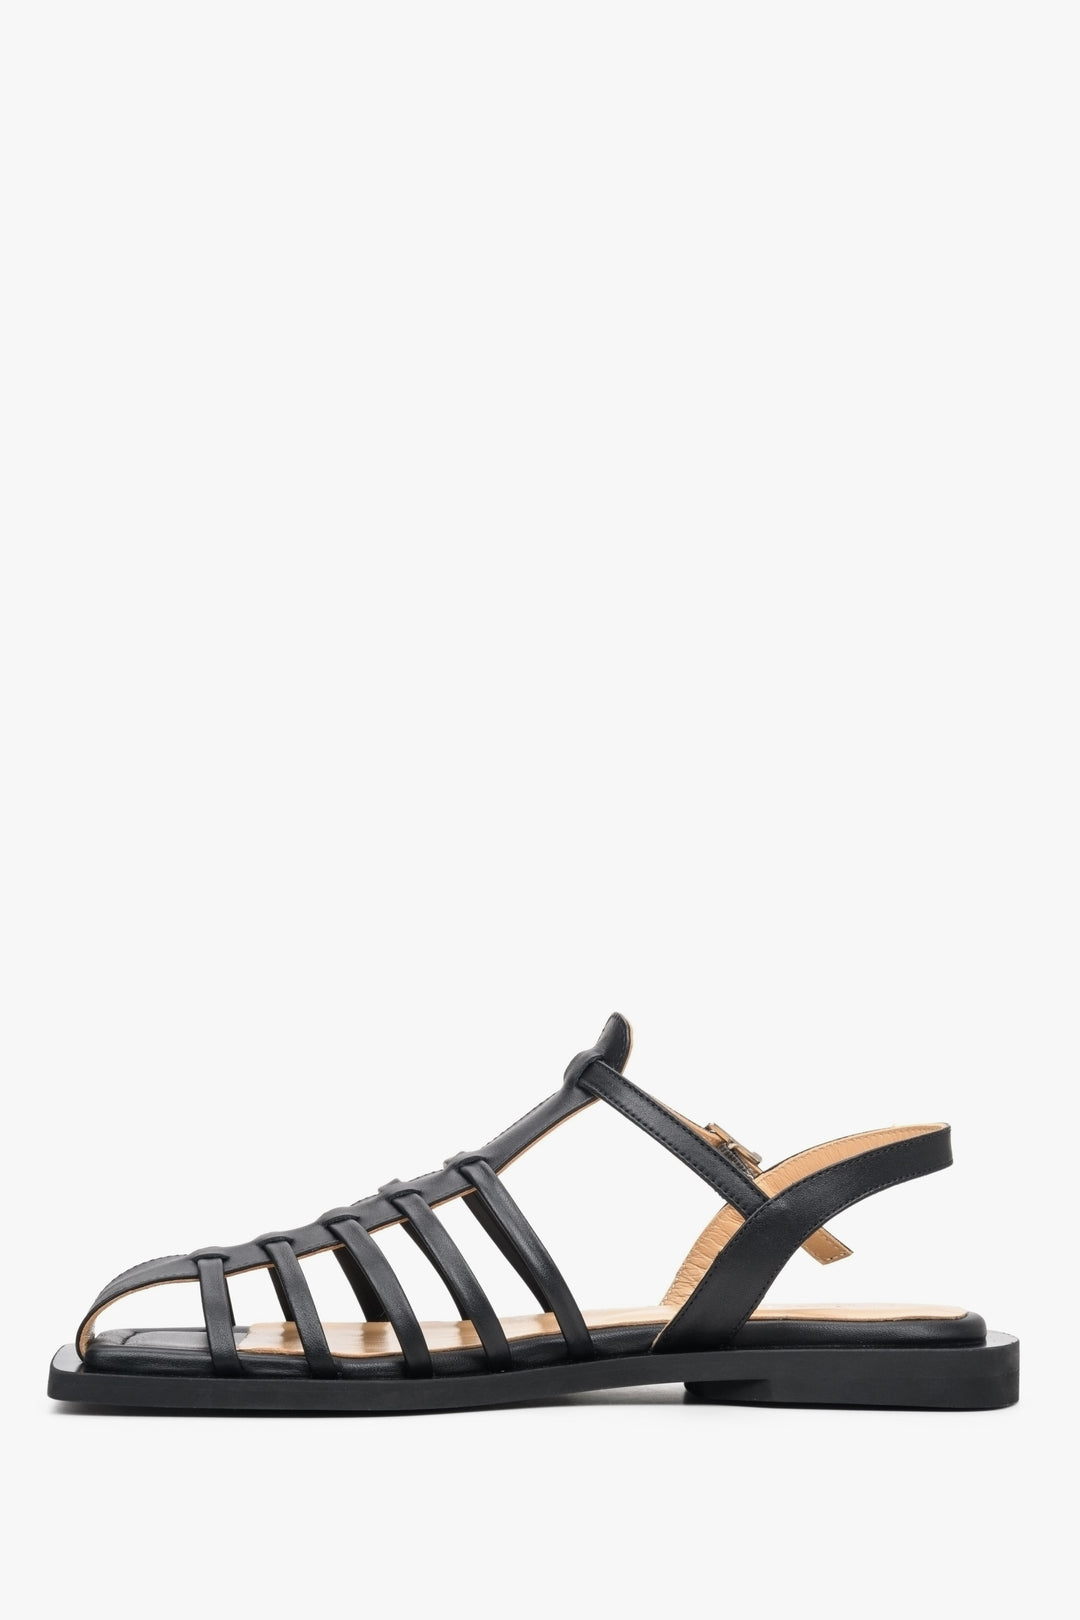 Women's black Estro sandals with thin straps for summer.